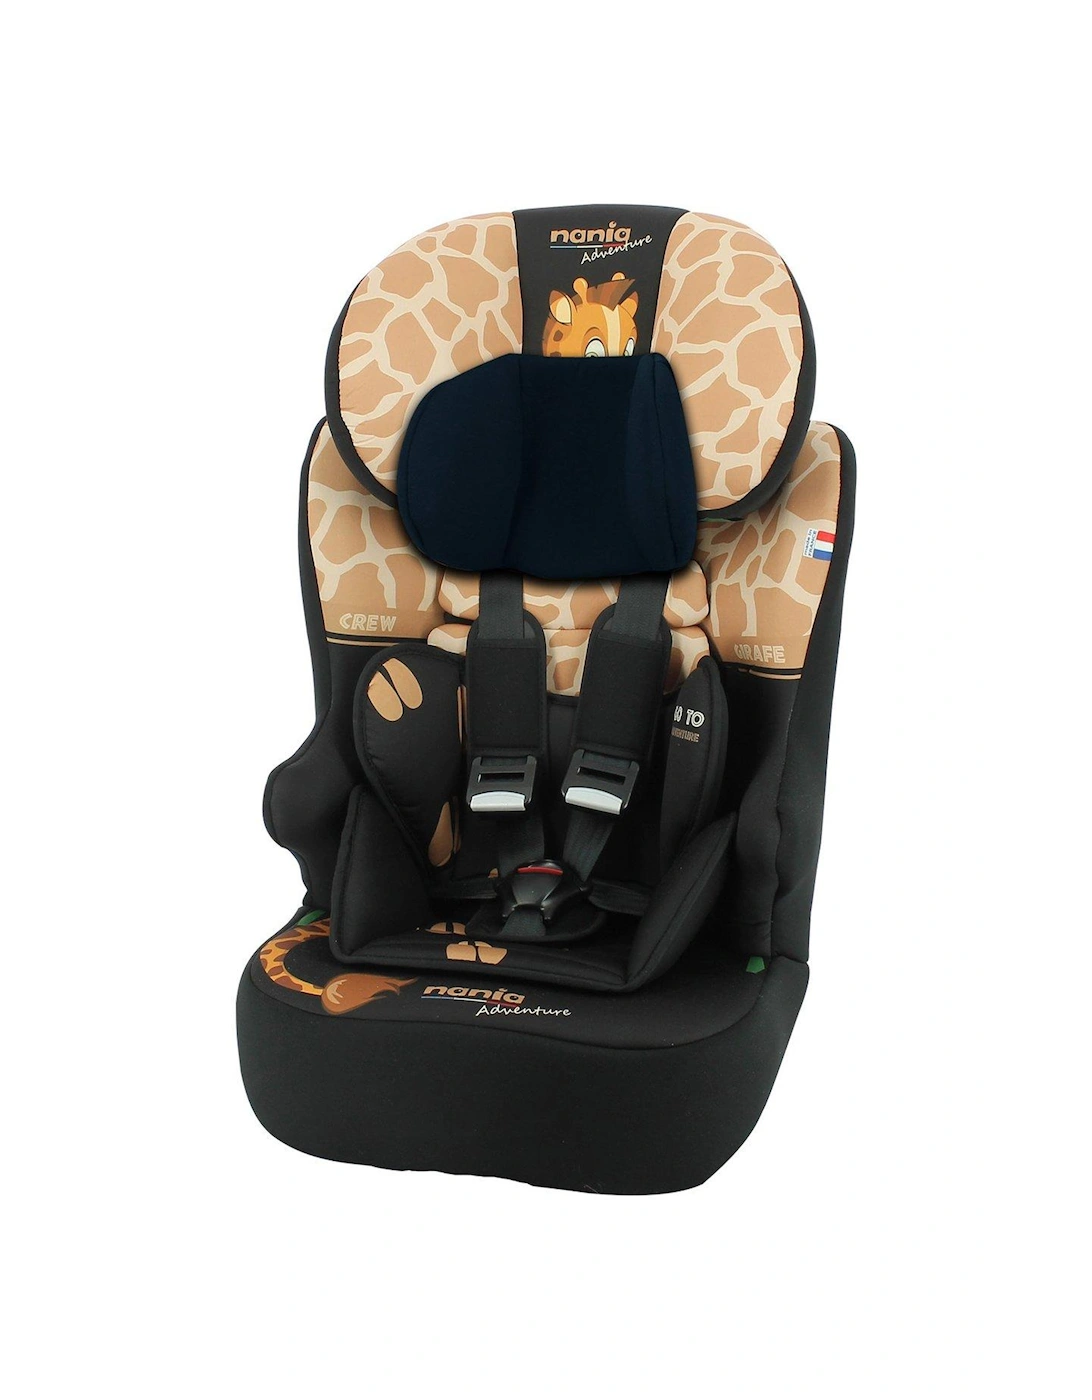 Giraffe Adventure Race I High Back Booster Car Seat - 76-140cm (9 months to 12 years) - Belt Fit, 2 of 1